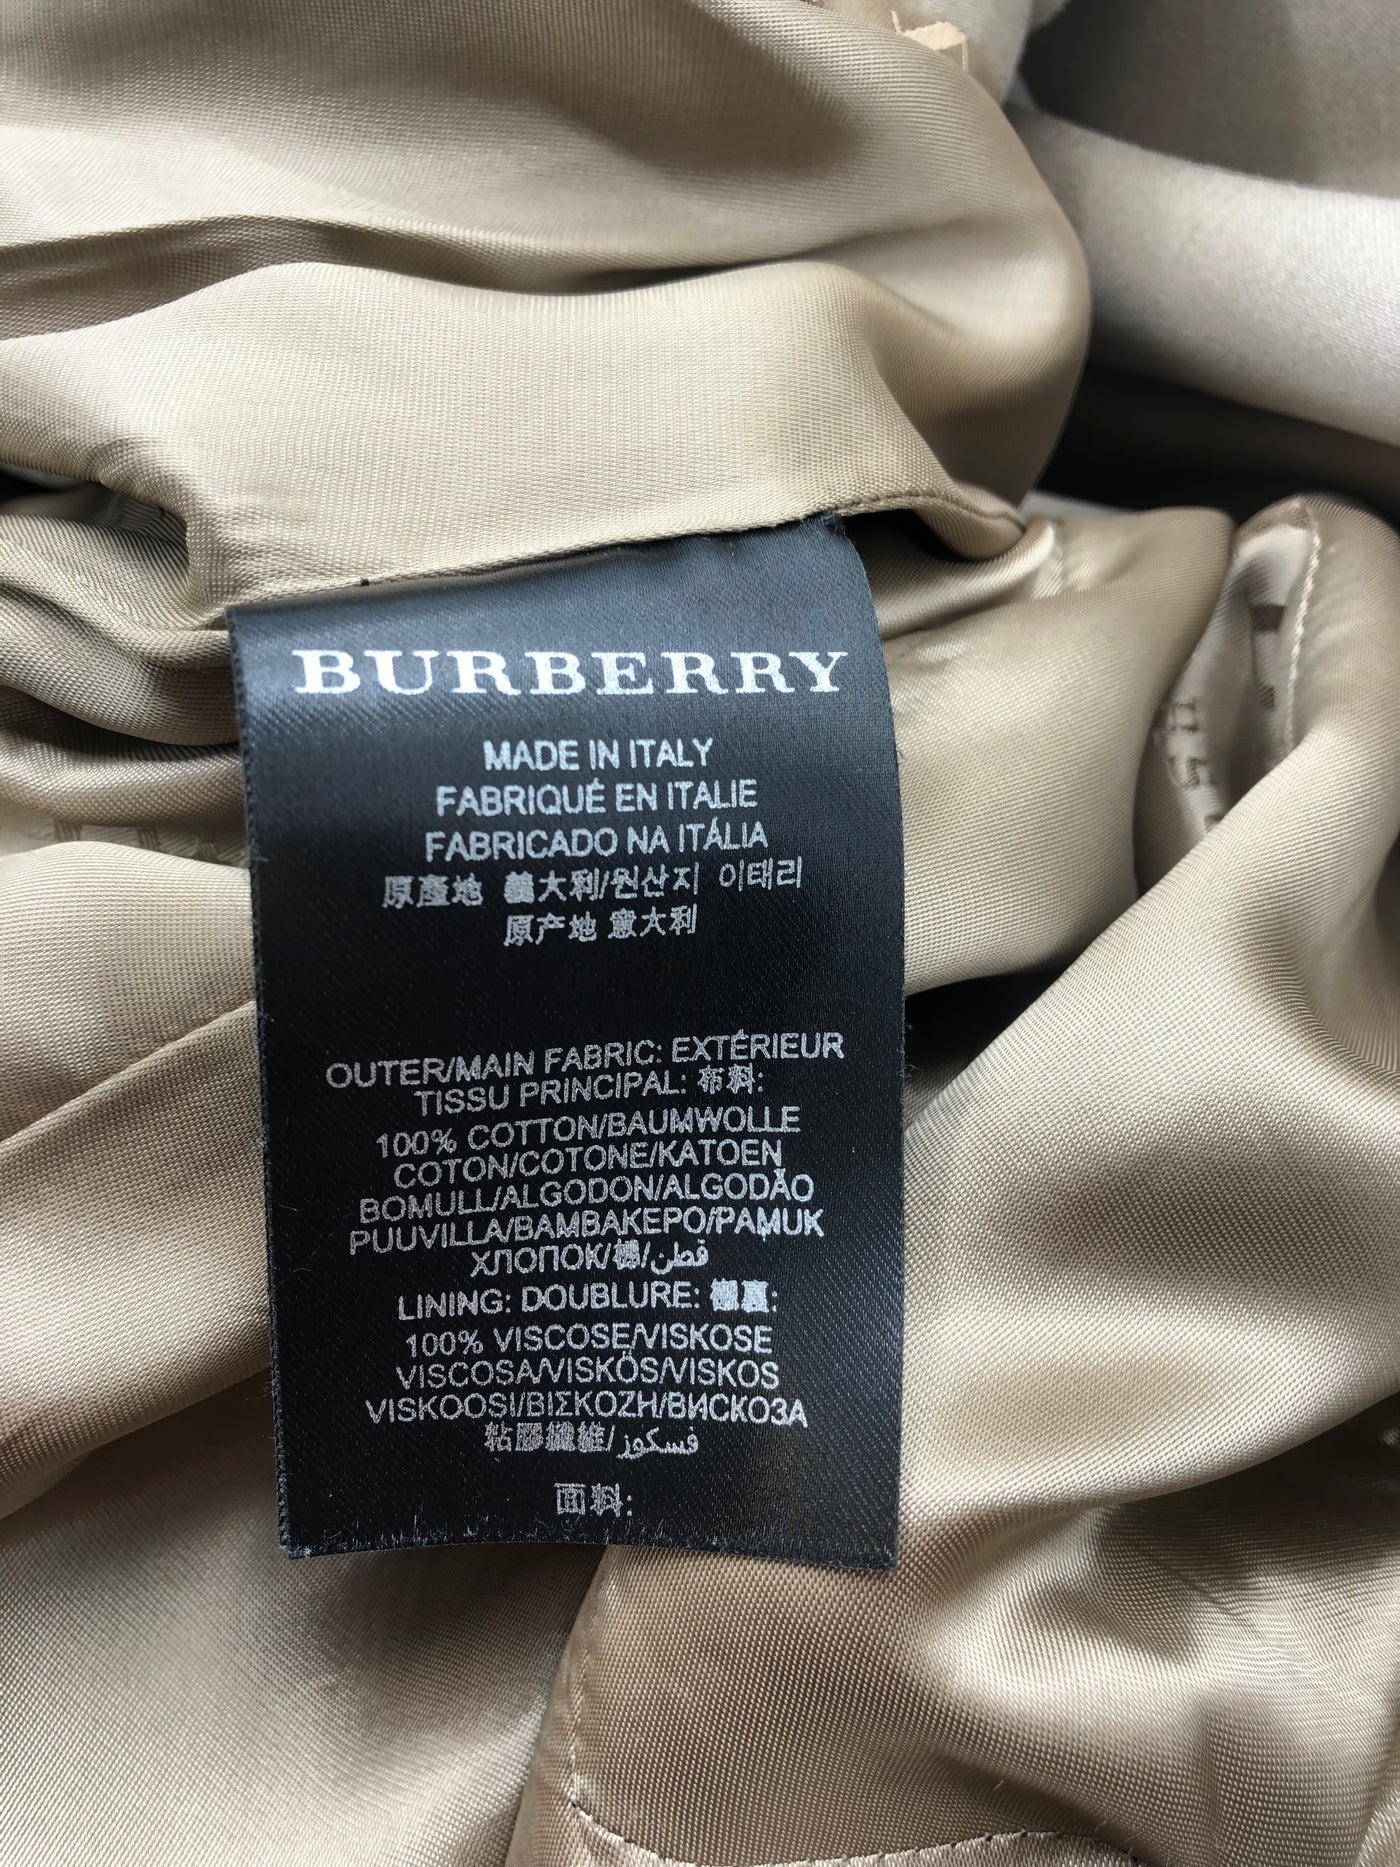 BURBERRY Prorsum Double-Breasted Trench Coat size 38